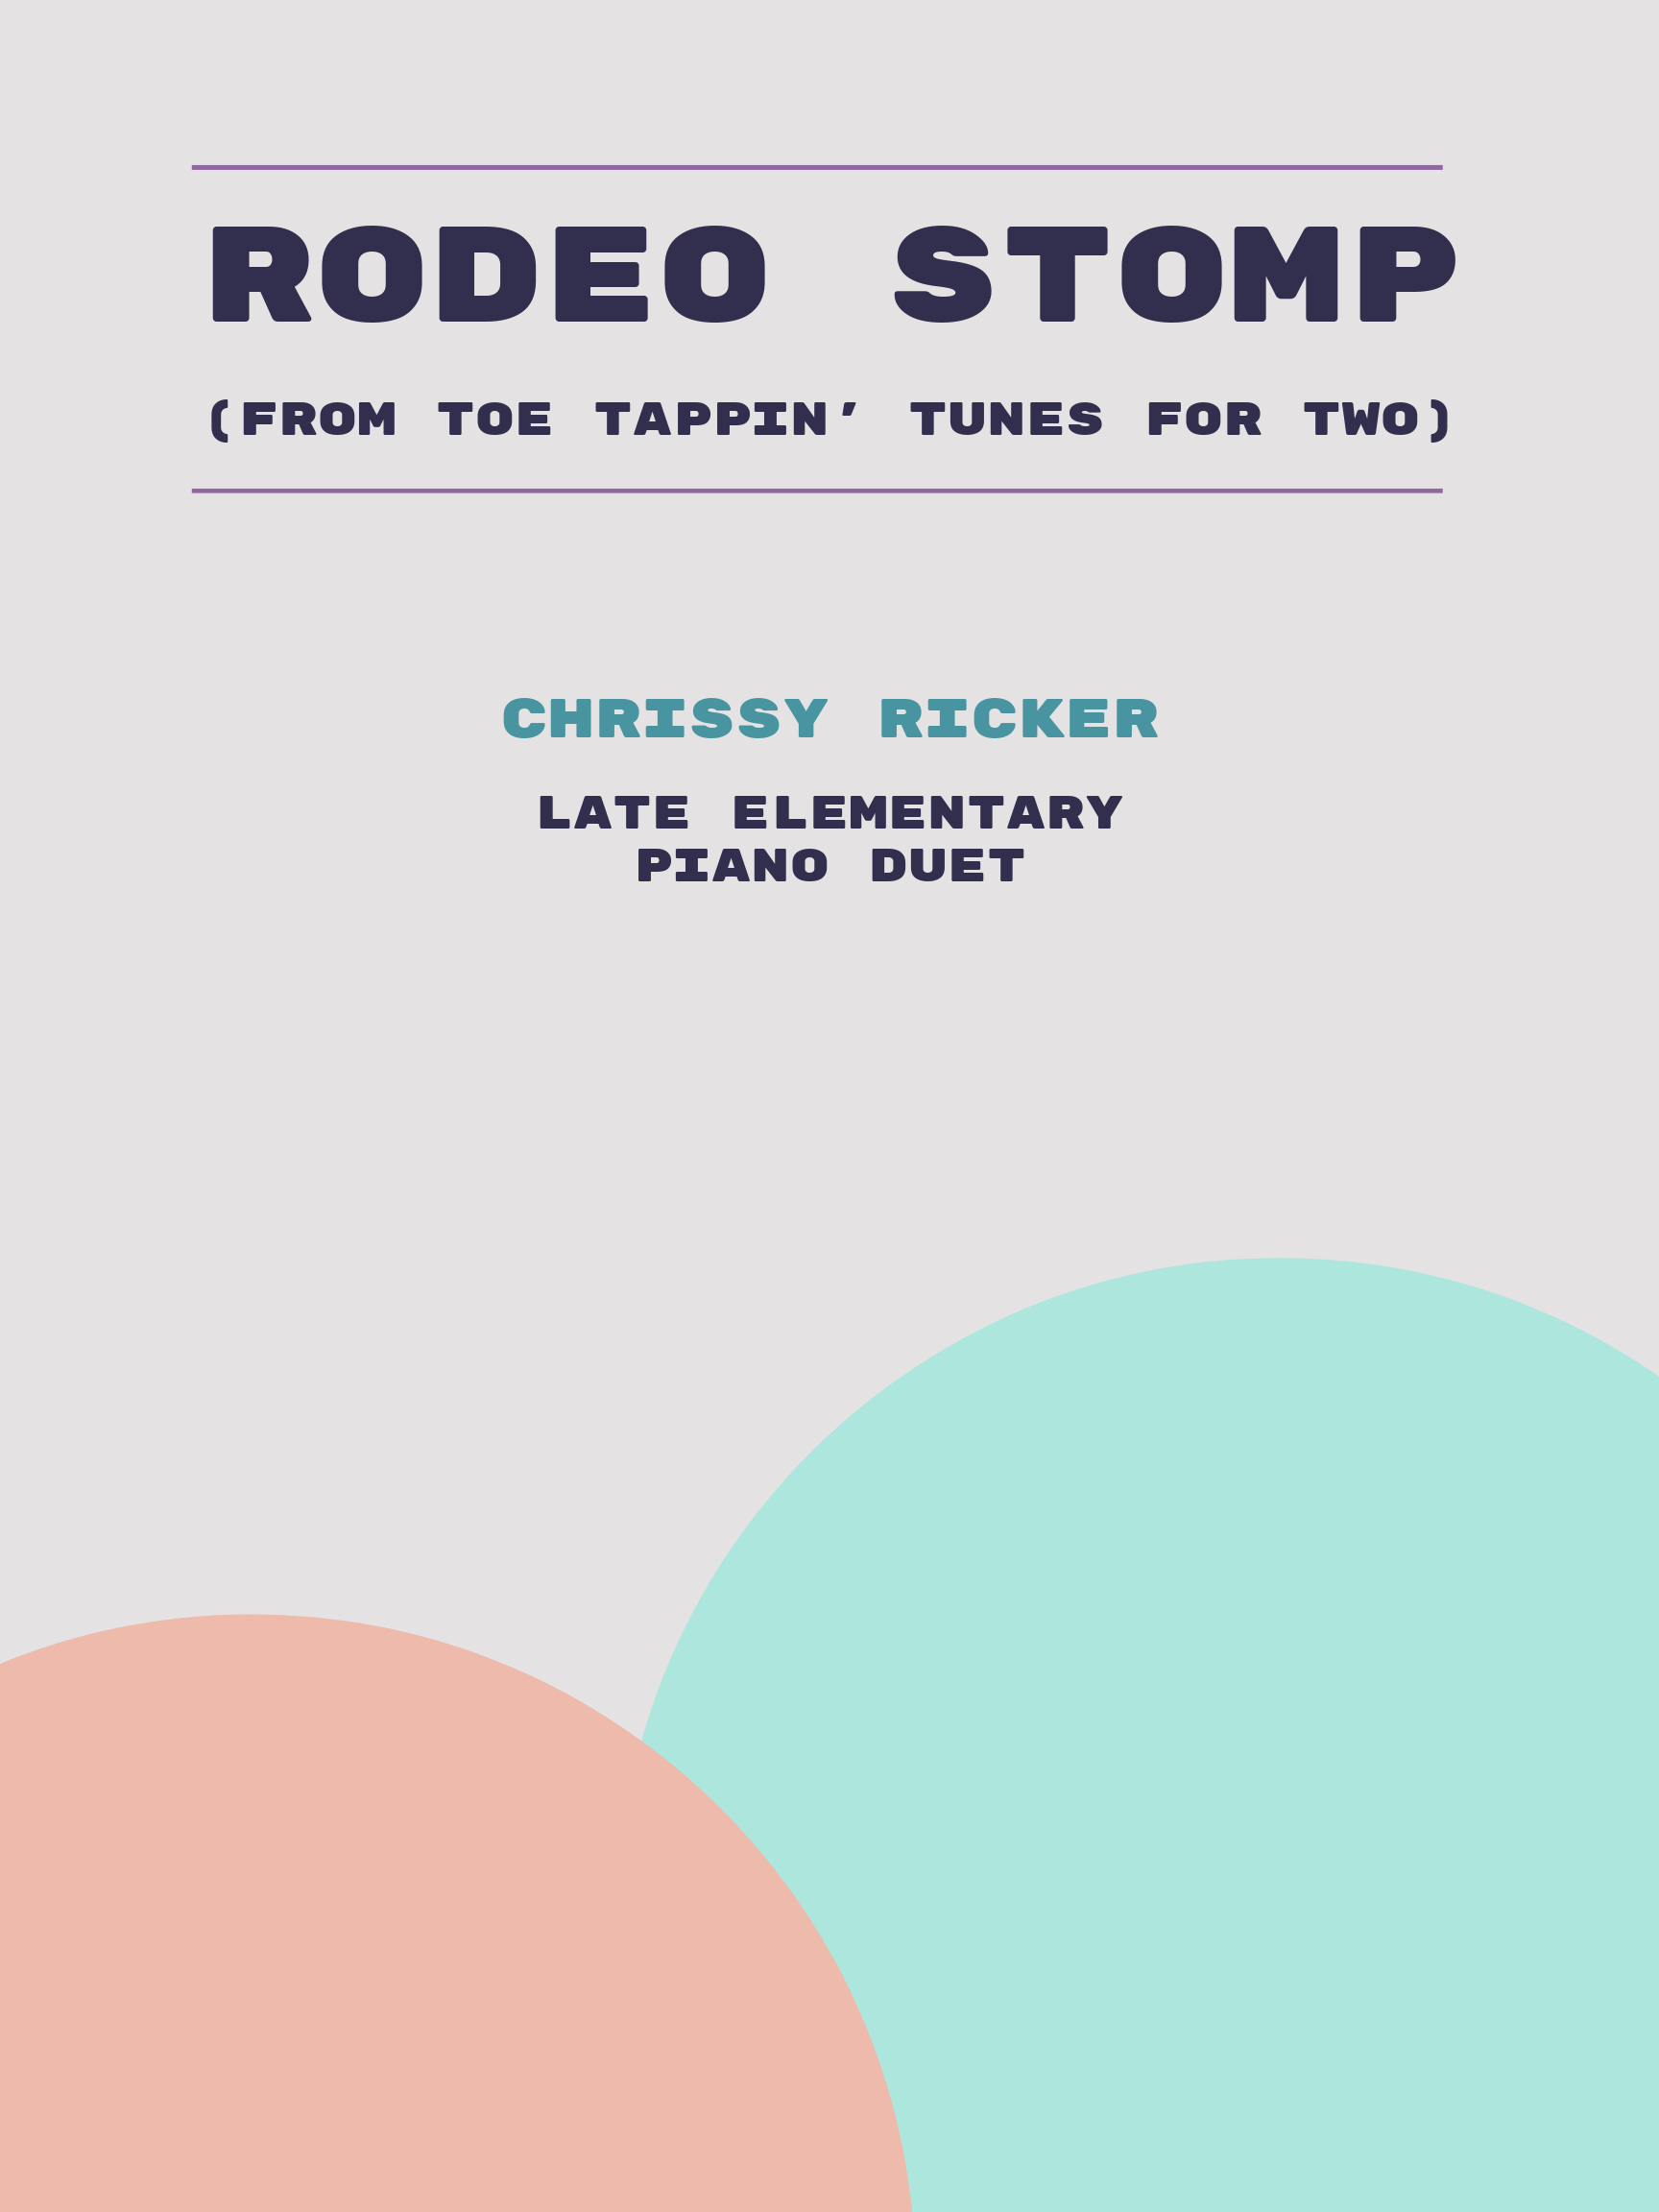 Rodeo Stomp by Chrissy Ricker